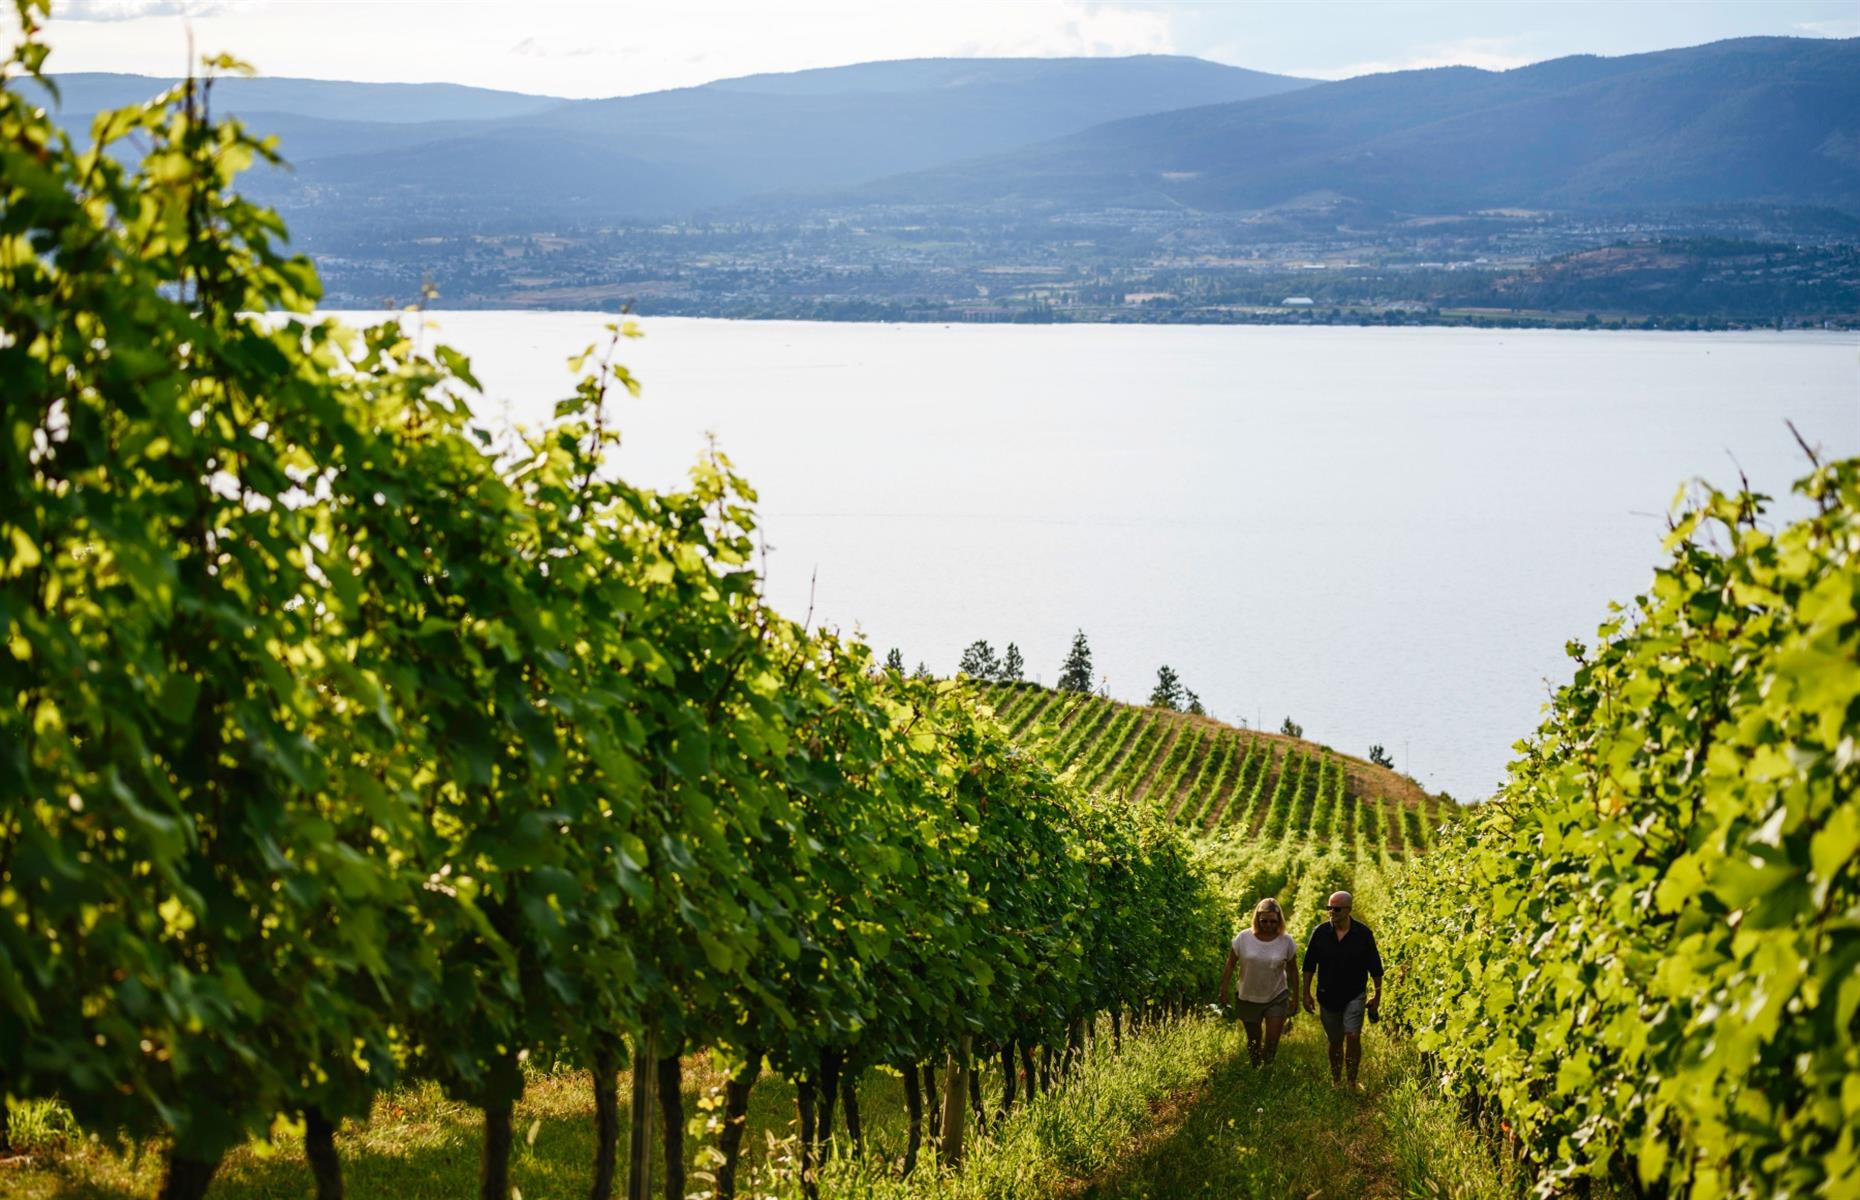 <p>The lake culture and temperate climate make Kelowna a popular spot in summer. While it’s a bit quieter in the winter, many of the wineries are open year-round and the city is also in close proximity to <a href="https://www.bigwhite.com">Big White</a>, Canada’s largest completely ski-in, ski-out resort. </p>  <p><a href="https://www.loveexploring.com/news/71007/okanagan-british-columbia-canada"><strong>7 reasons you need to visit Canada's Okanagan Valley</strong></a></p>